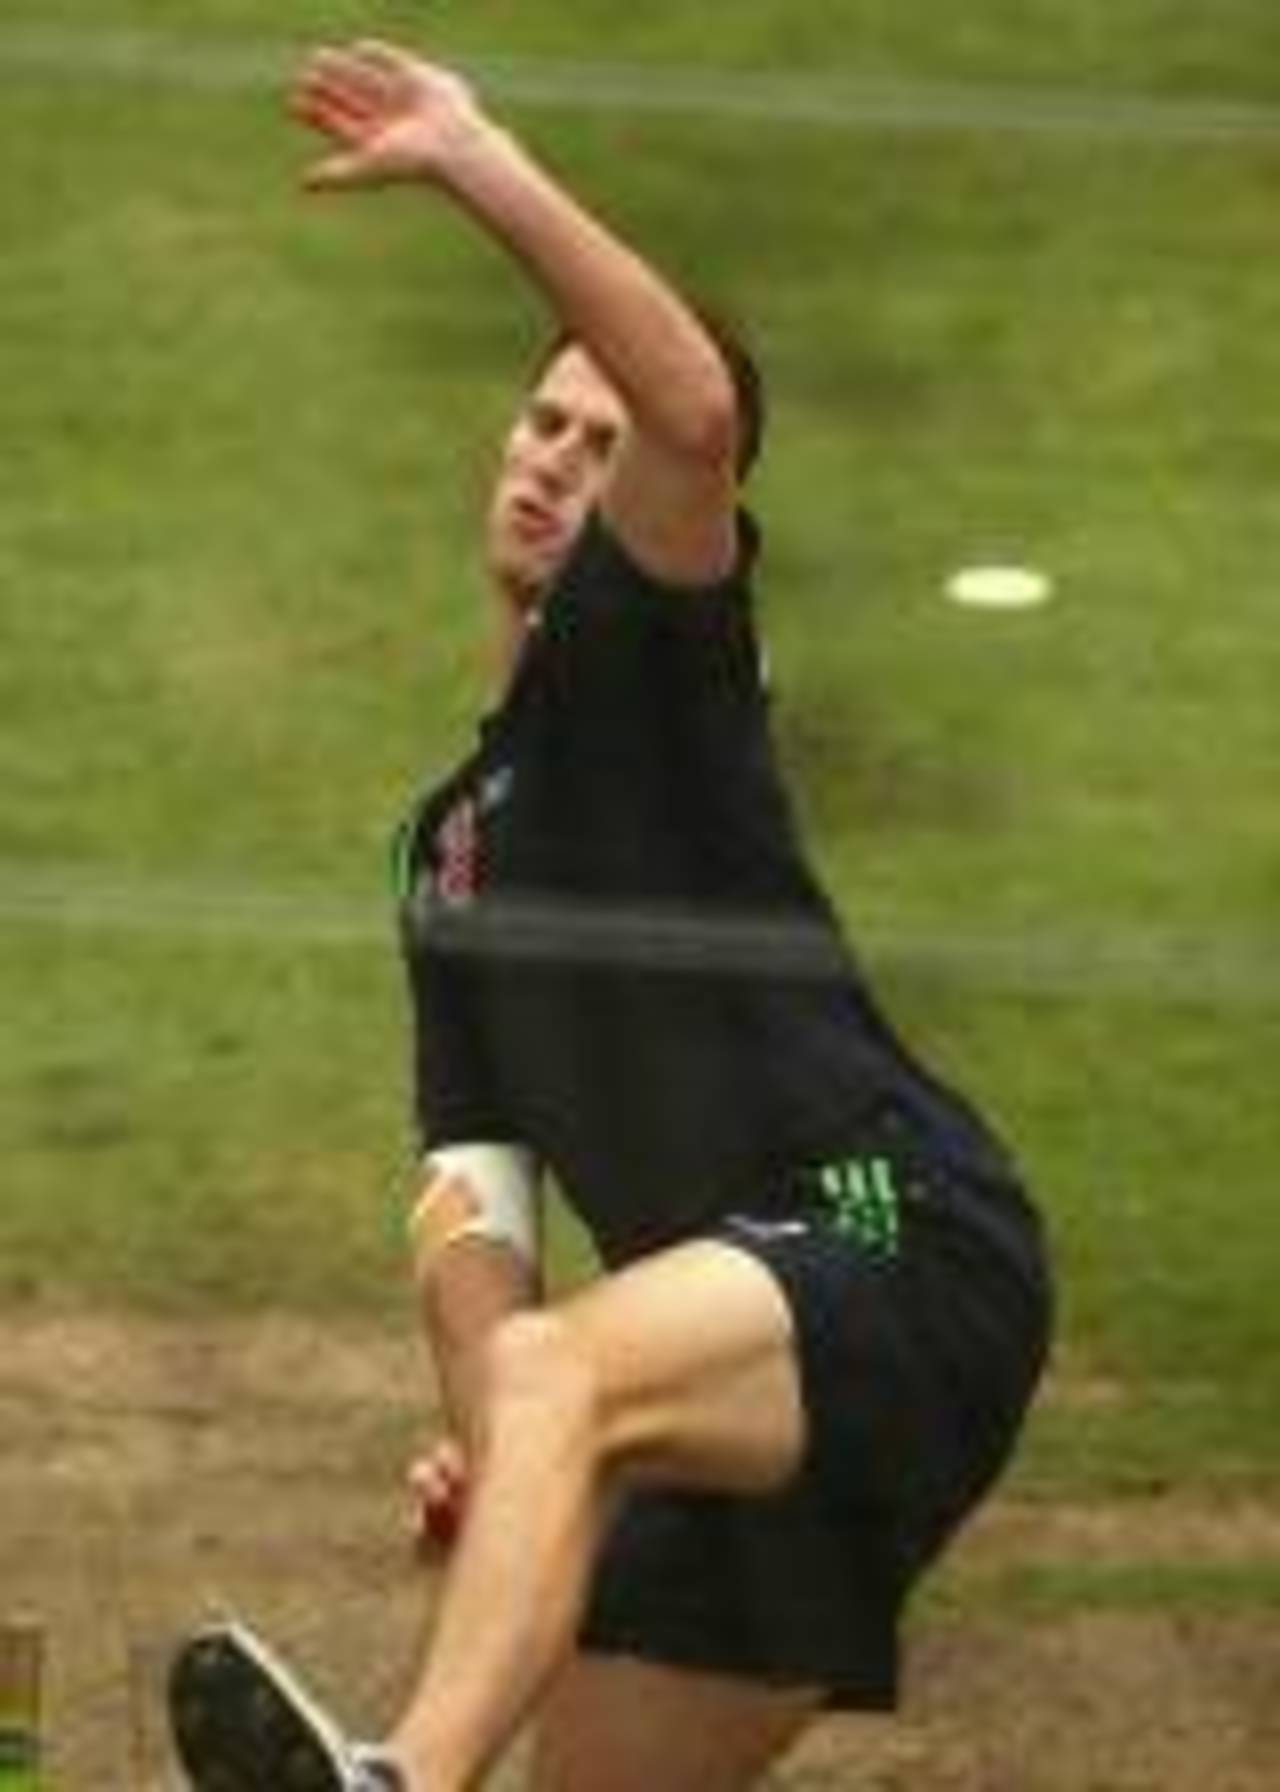 Shaun Tait about to deliver as he pushes for a Test spot, MCG, December 24, 2007